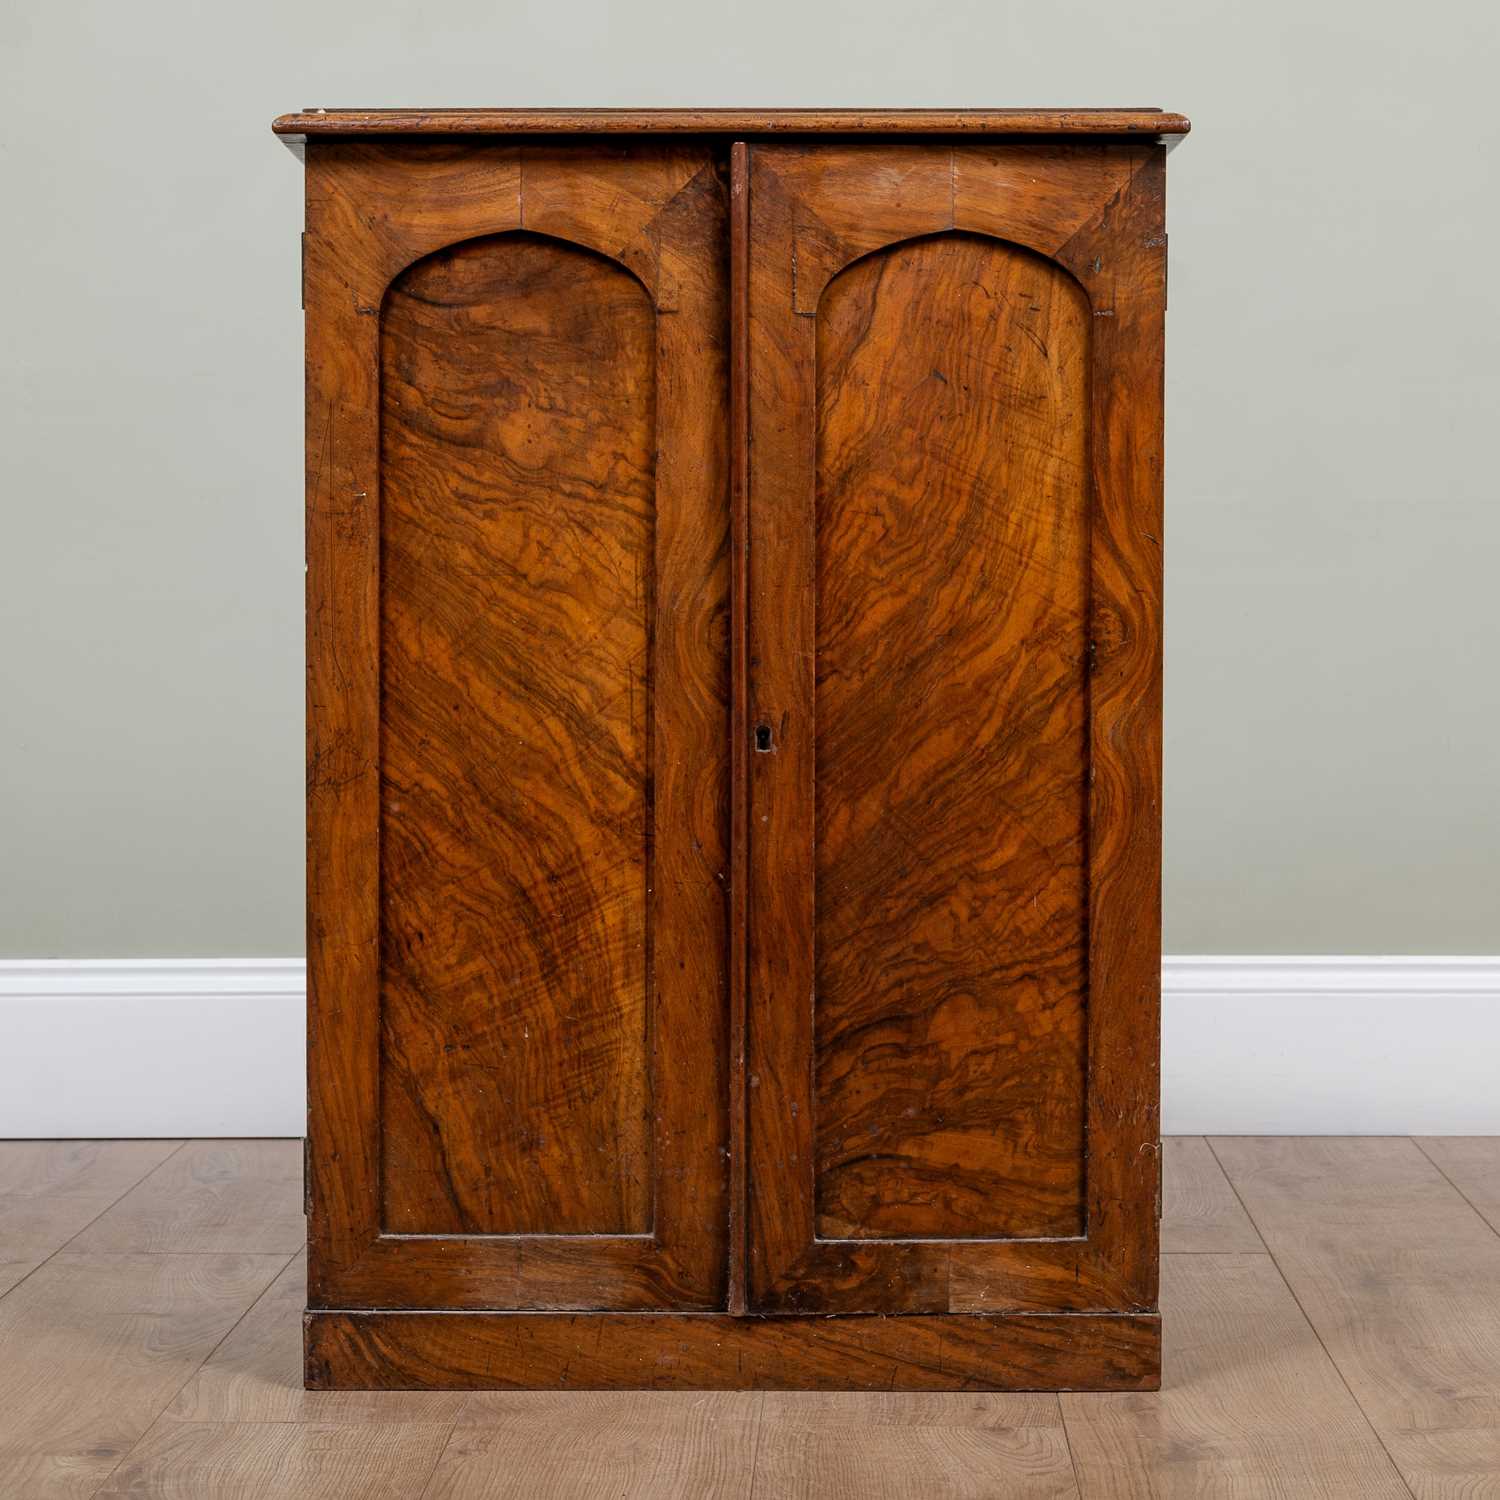 A 19th century walnut small cupboard with panelled doors enclosing adjustable shelves, with carrying